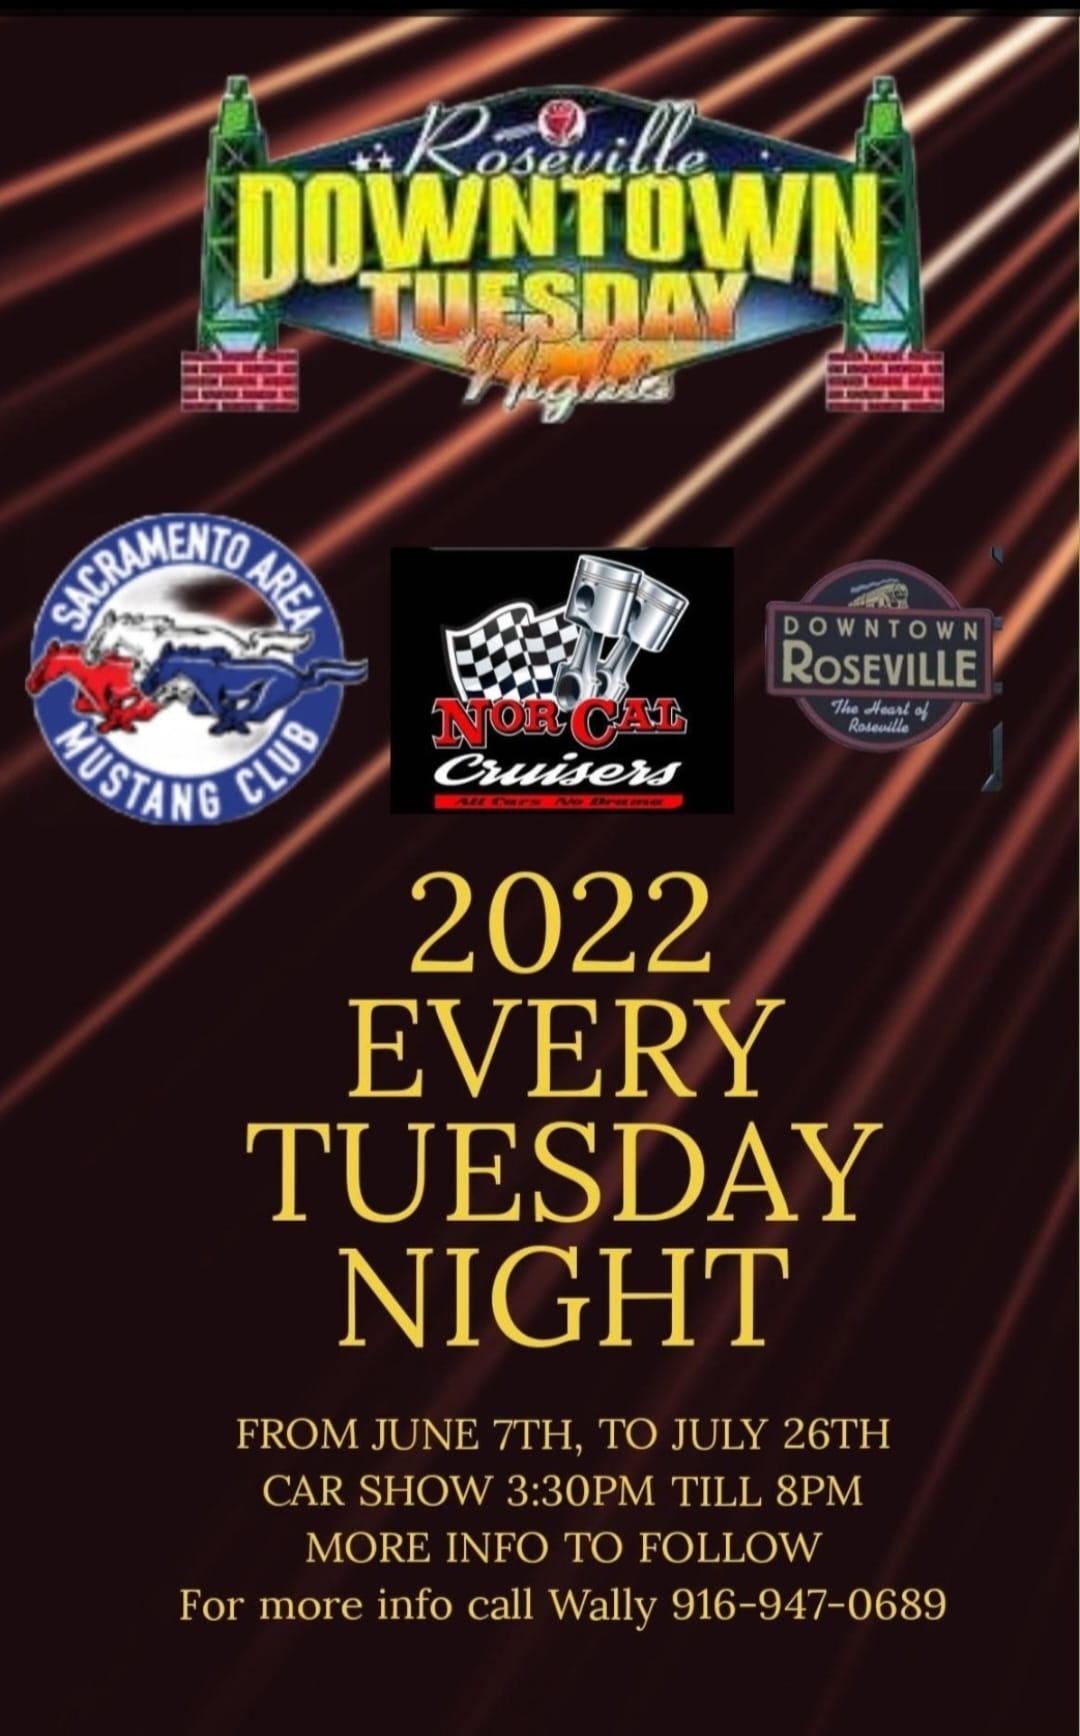 Downtown Tuesday Nights 2022